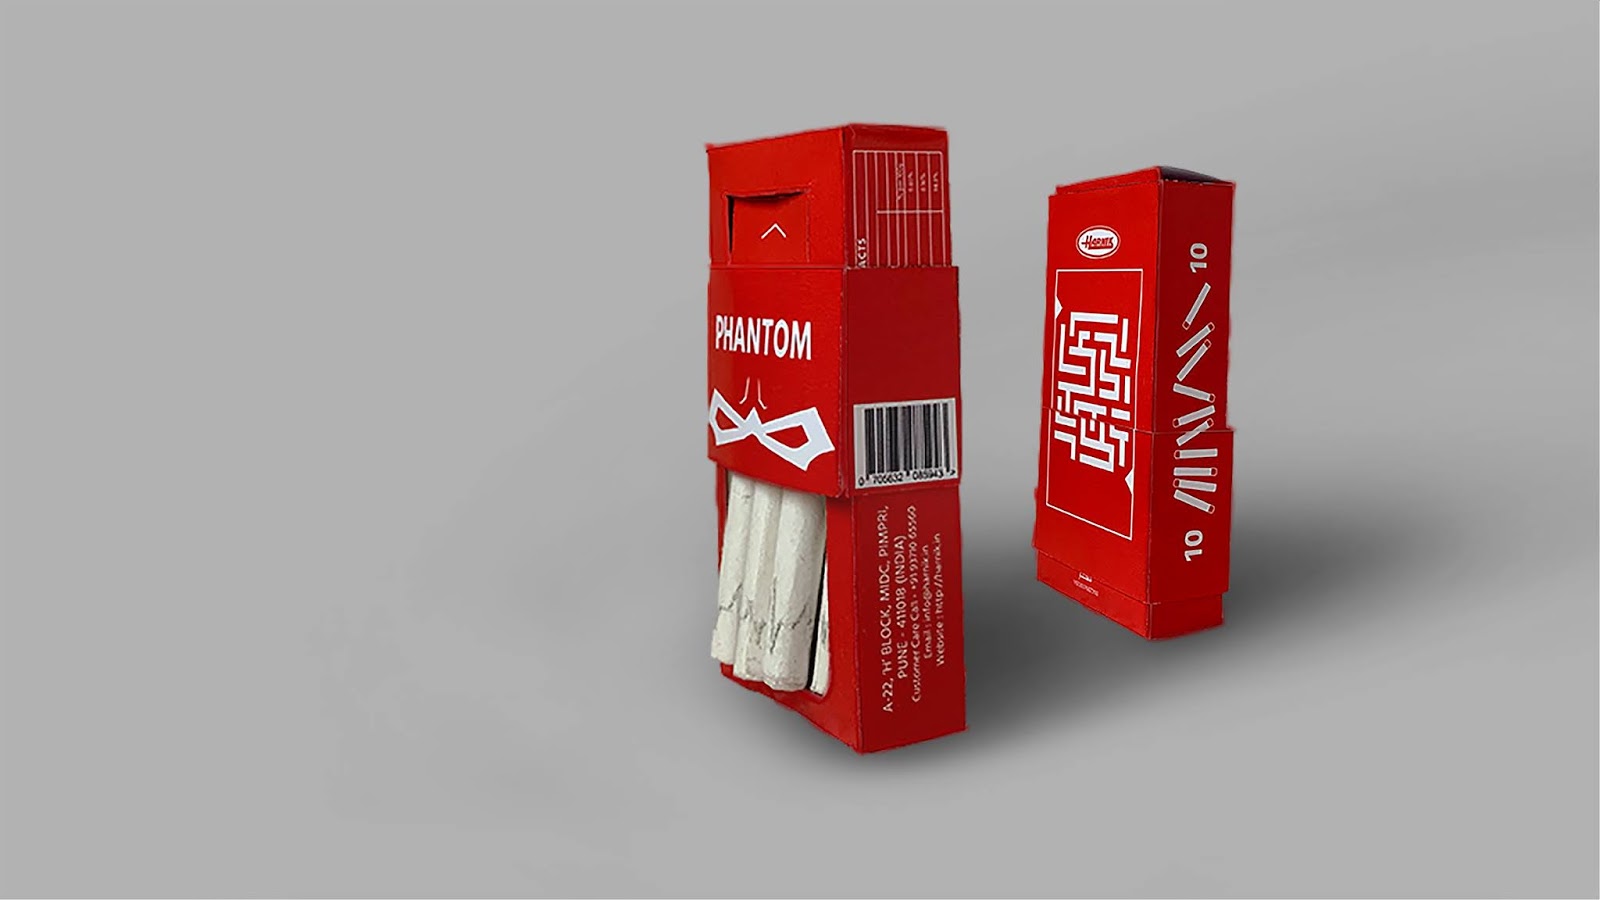 Phantom Sweet Cigarettes On Packaging Of The World Creative Package Design Gallery